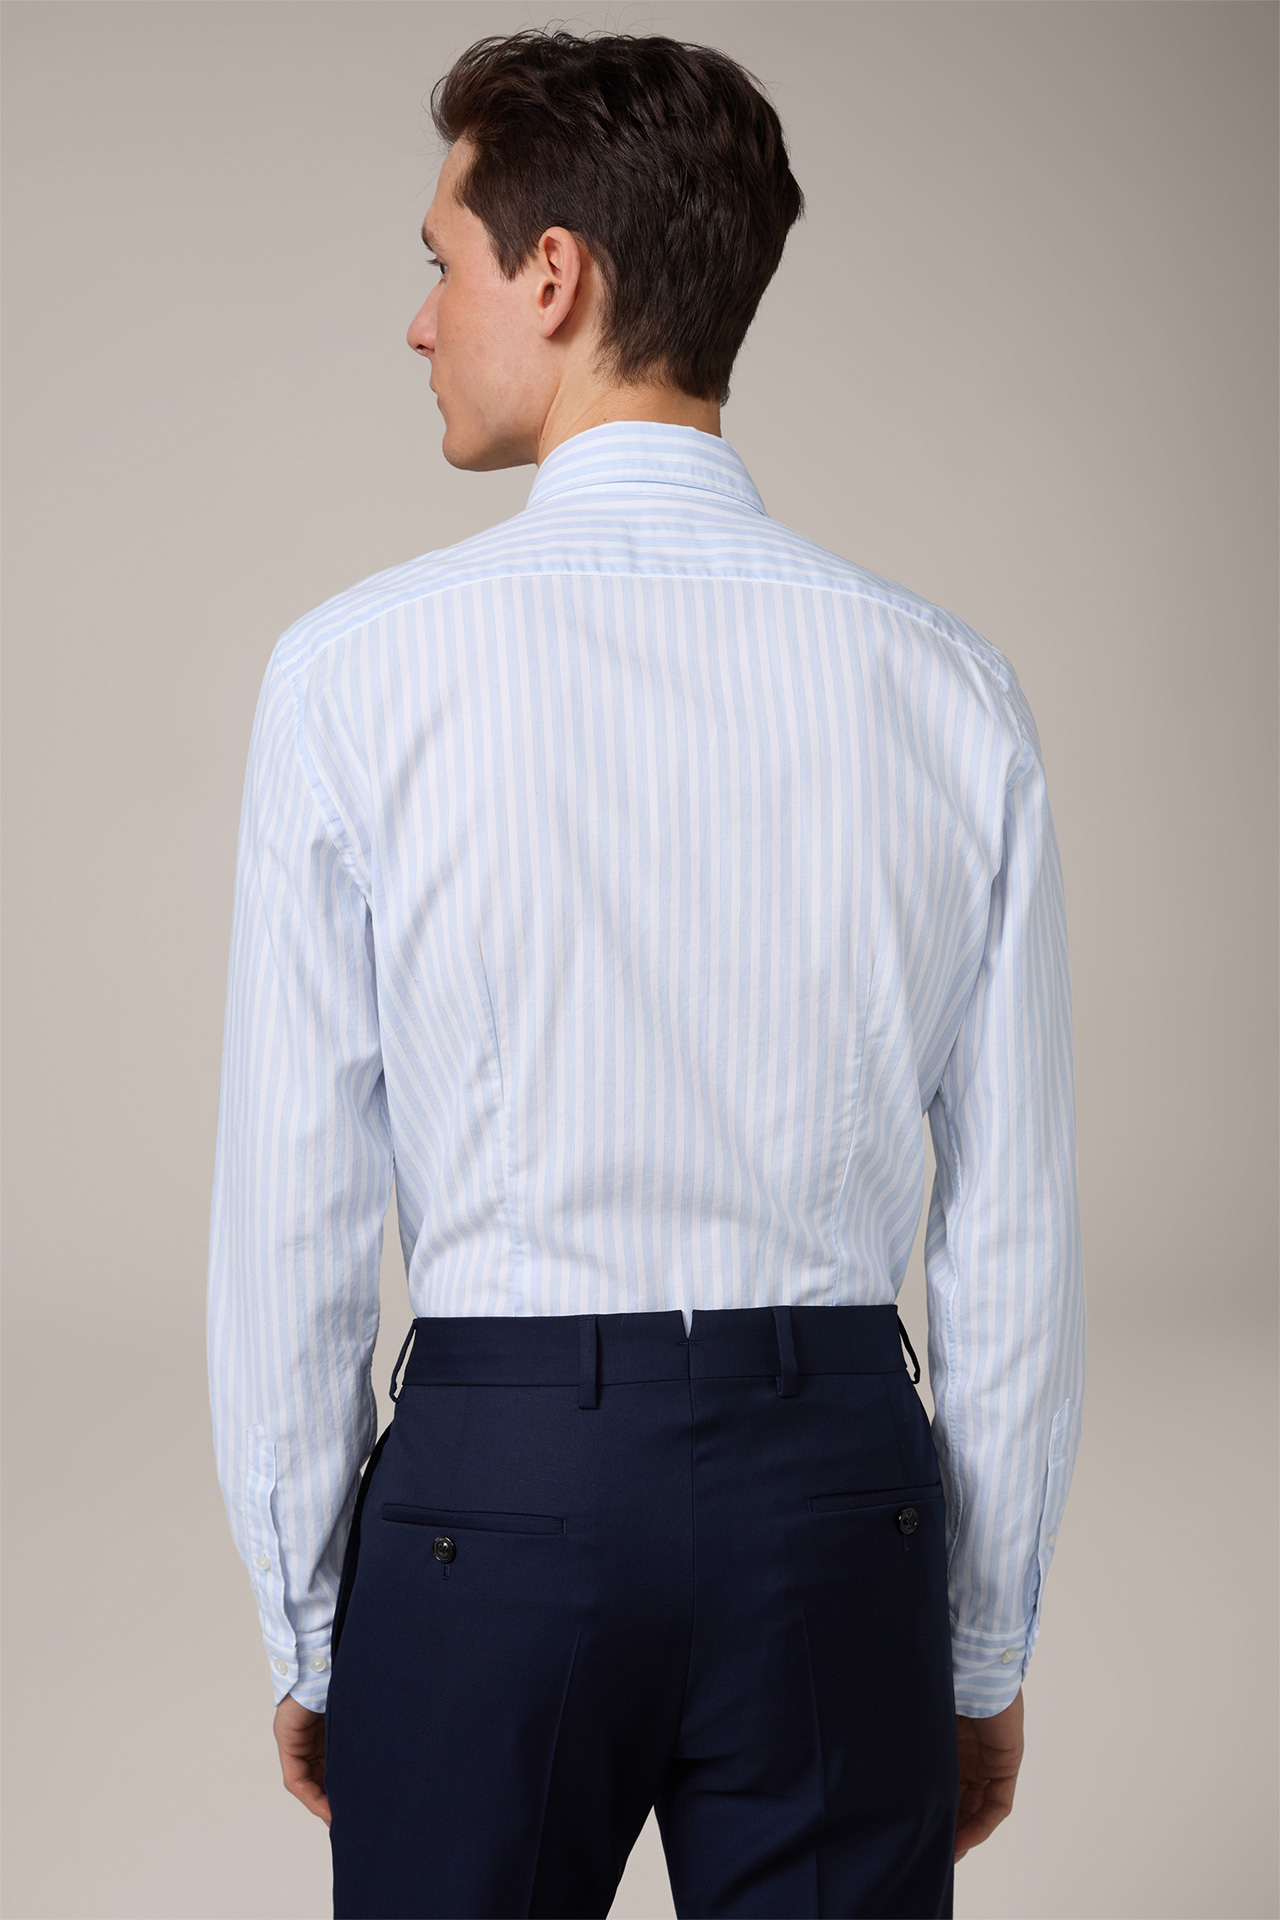 Trivo Cotton Shirt in Light Blue and White Striped